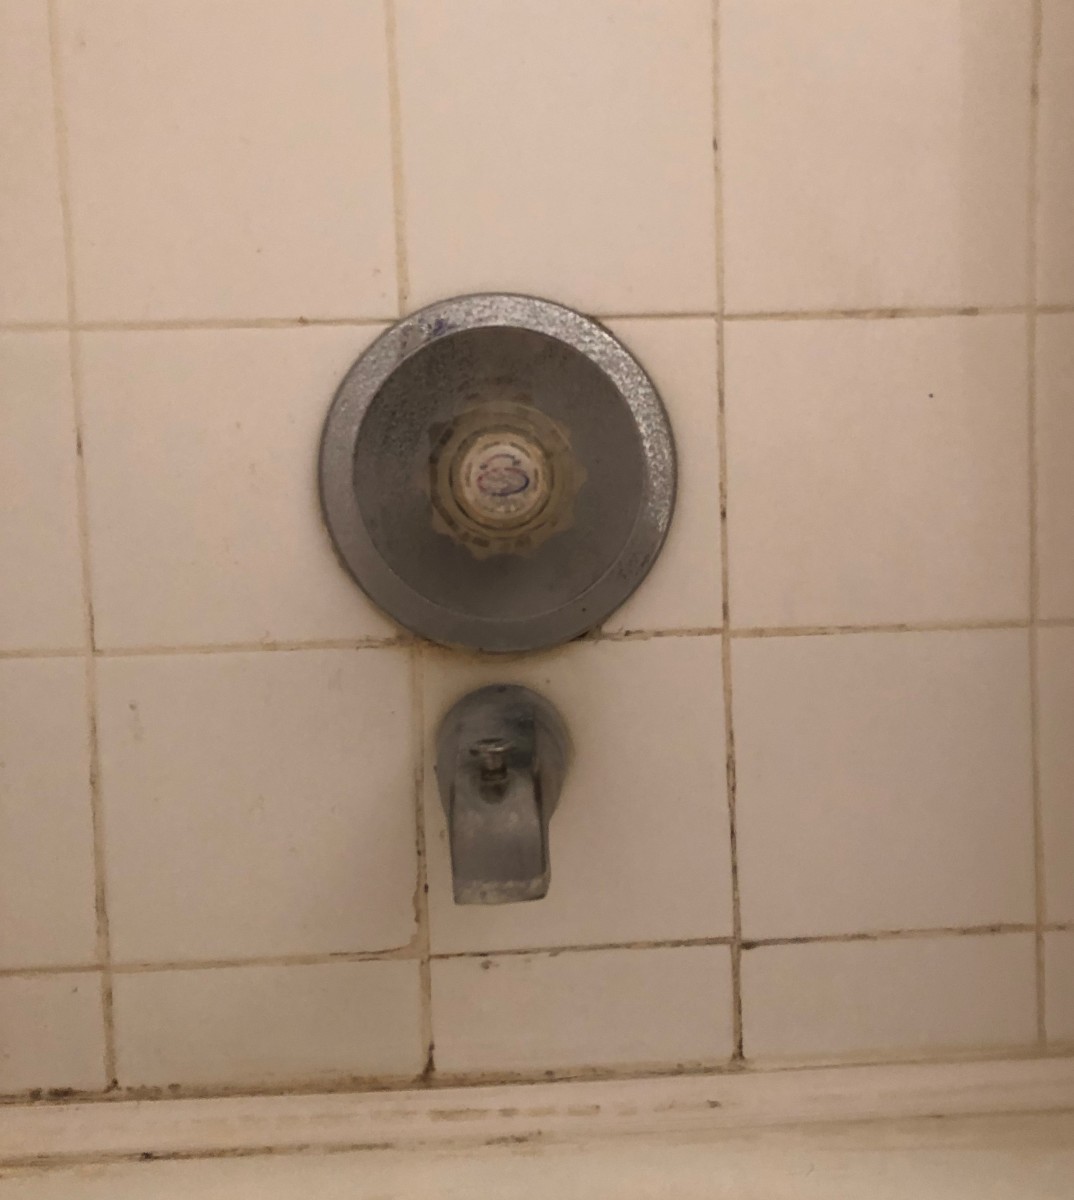 Replace A Single Handle Shower Valve, How To Remove Bathroom Fixtures From Wall